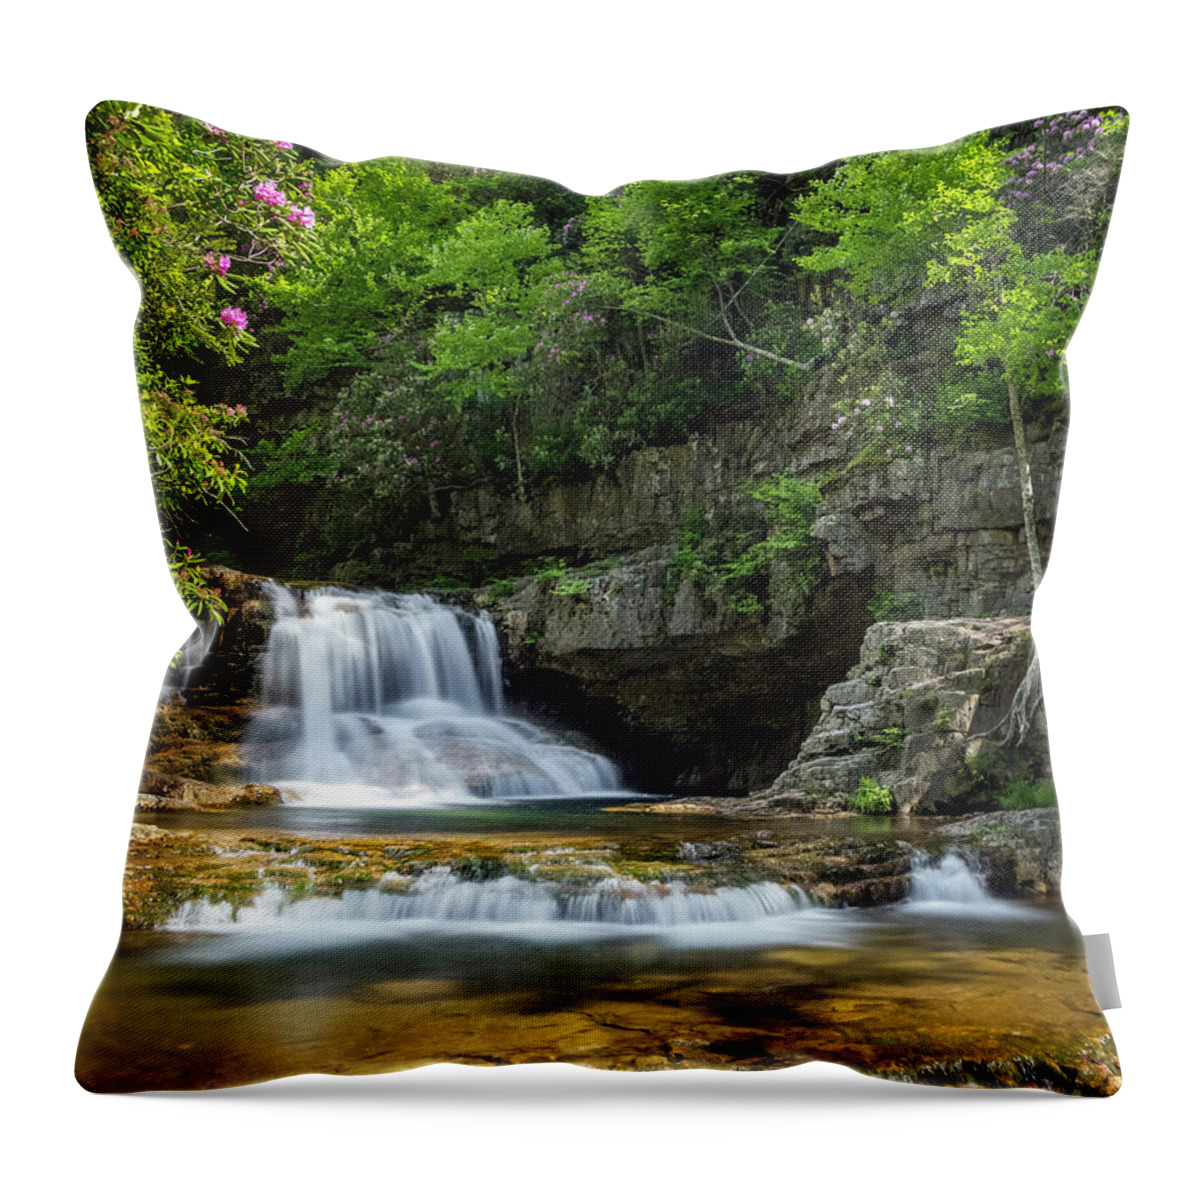 Spring Throw Pillow featuring the photograph Saint Mary's Falls Among the Rododendrons by Karen Jorstad